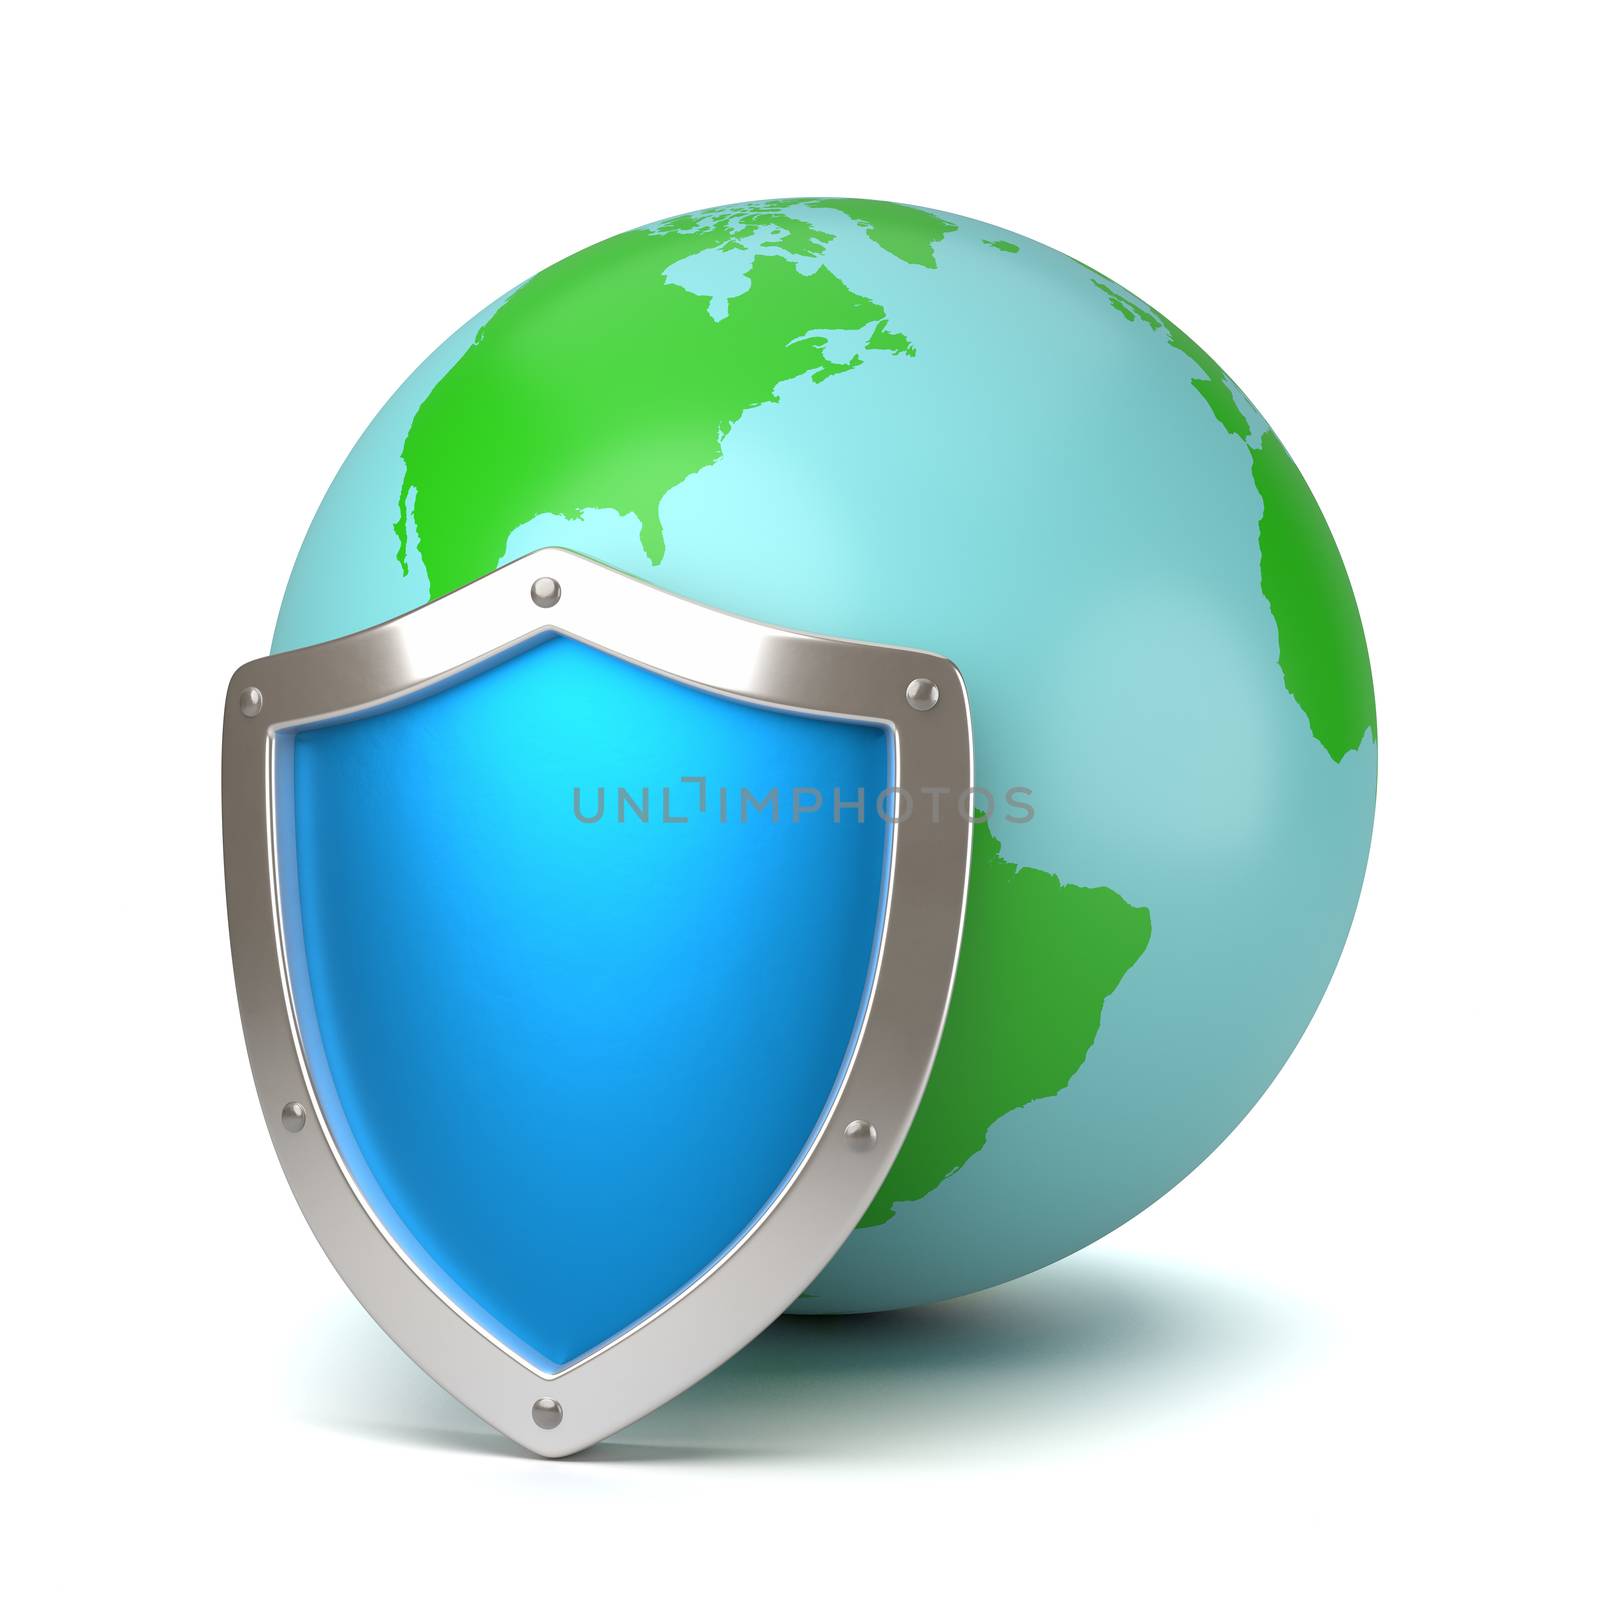 Earth Protected by a Blue Metallic Shield on White Background 3D Illustration